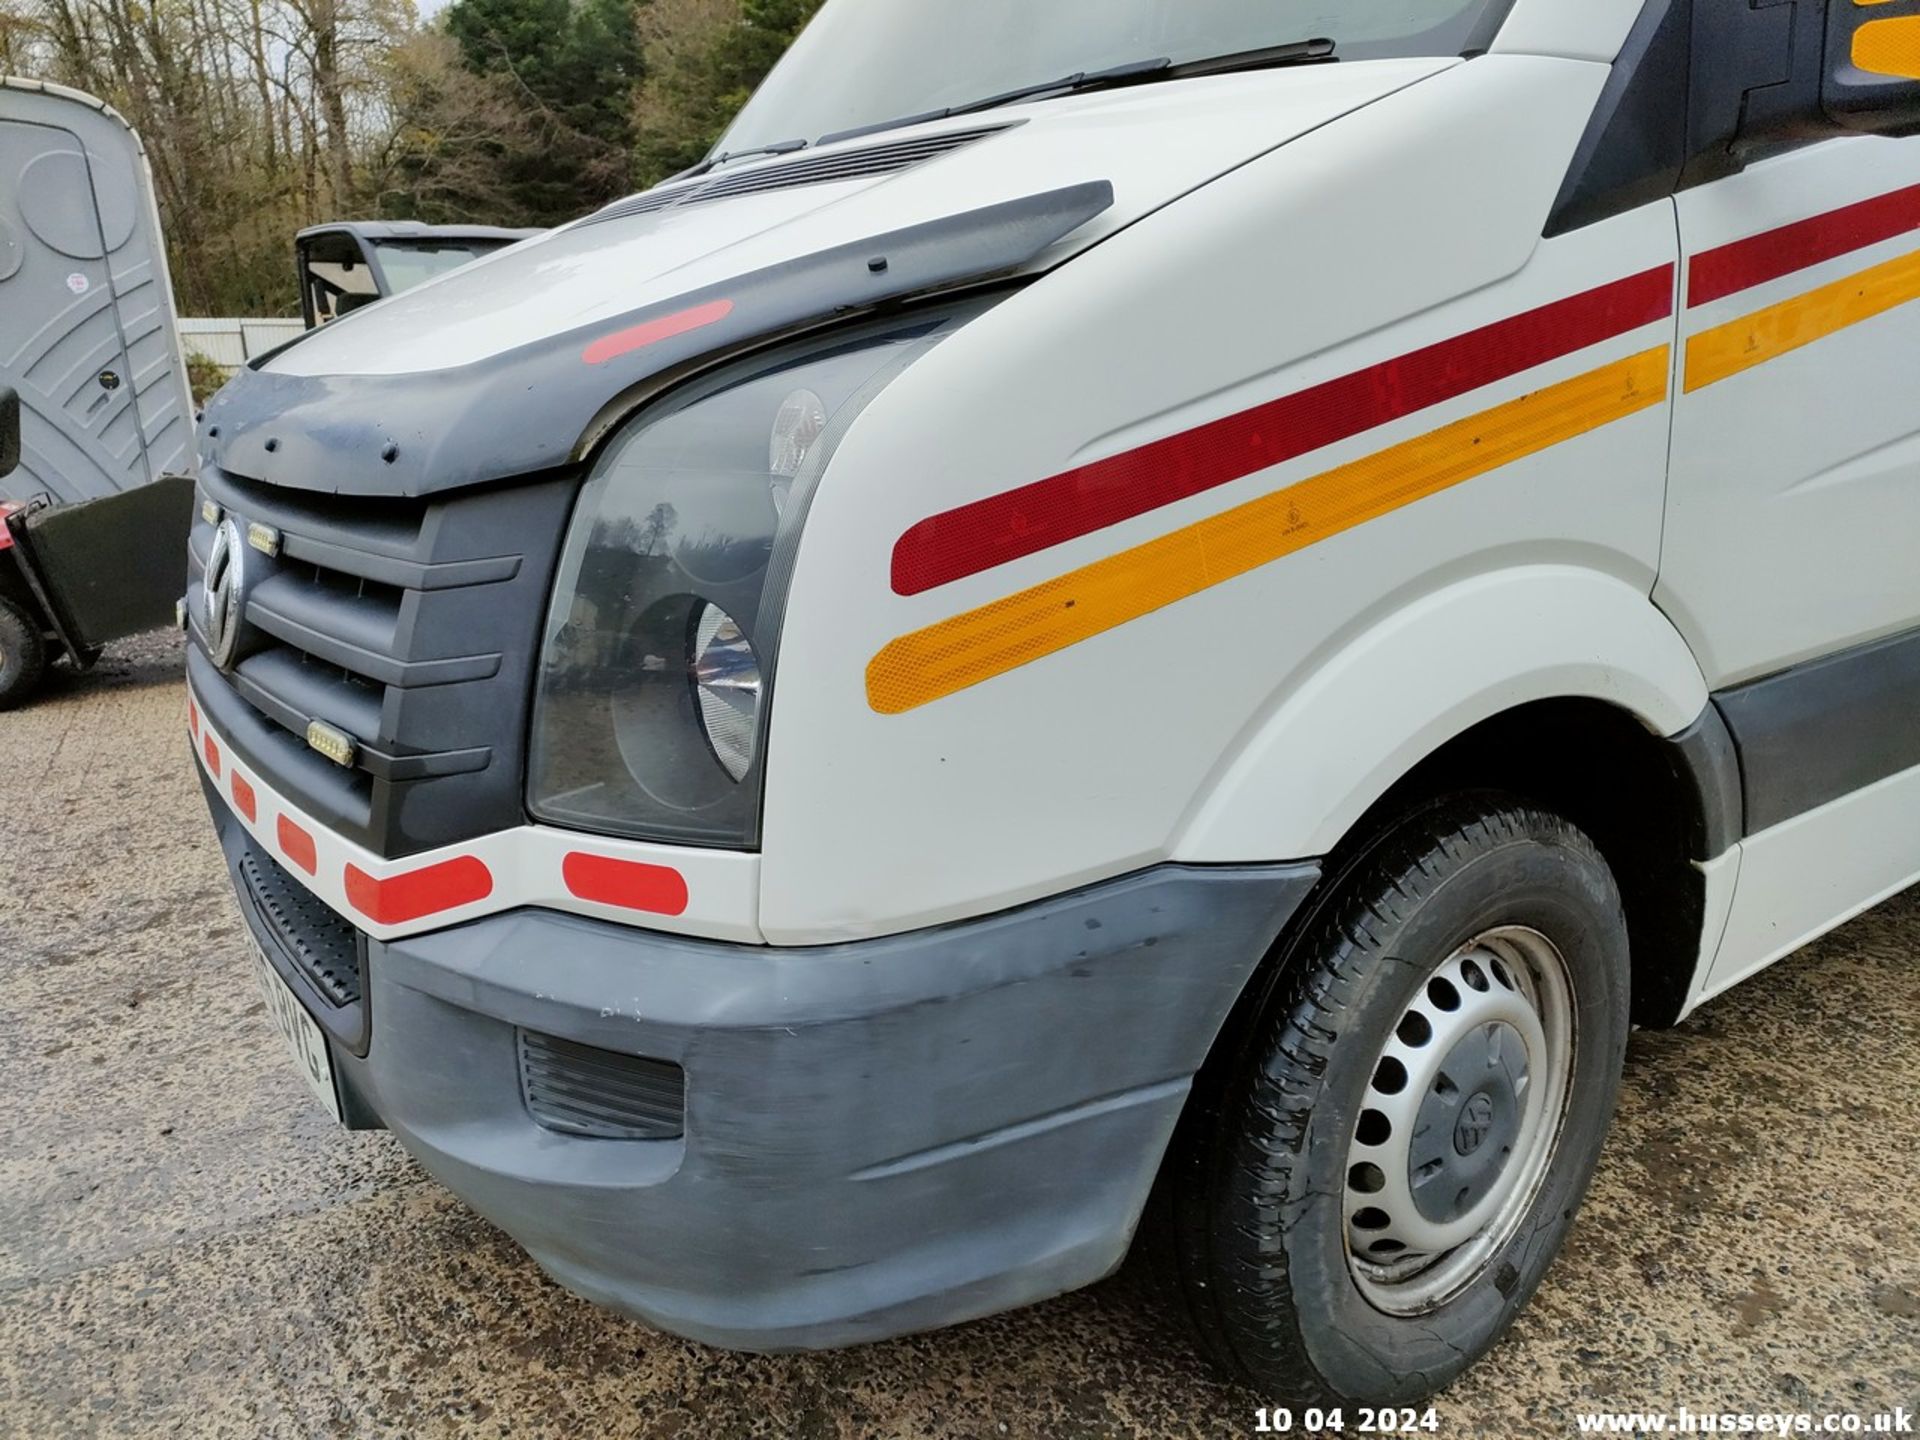 16/16 VOLKSWAGEN CRAFTER CR35 TDI - 1968cc 2dr (White, 146k) - Image 17 of 52